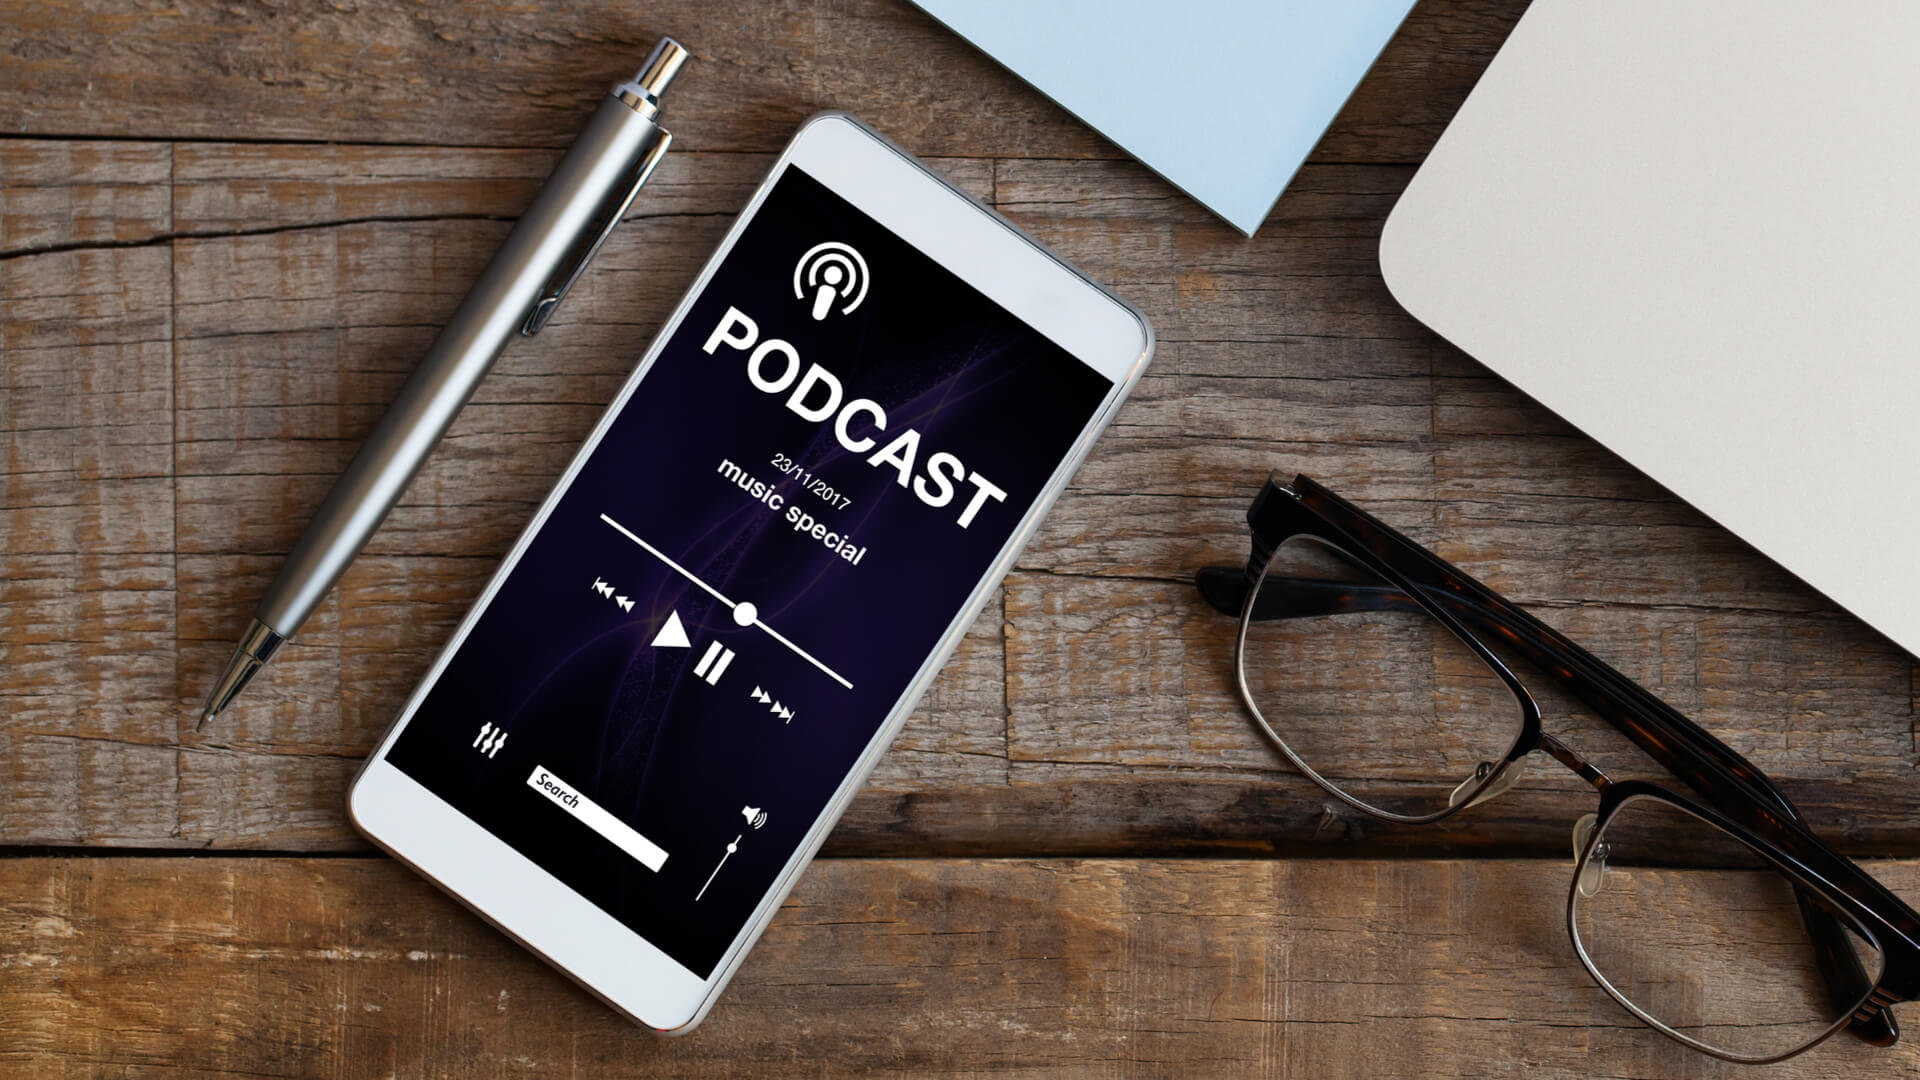 New Nielsen service offers podcast audience insights for advertising